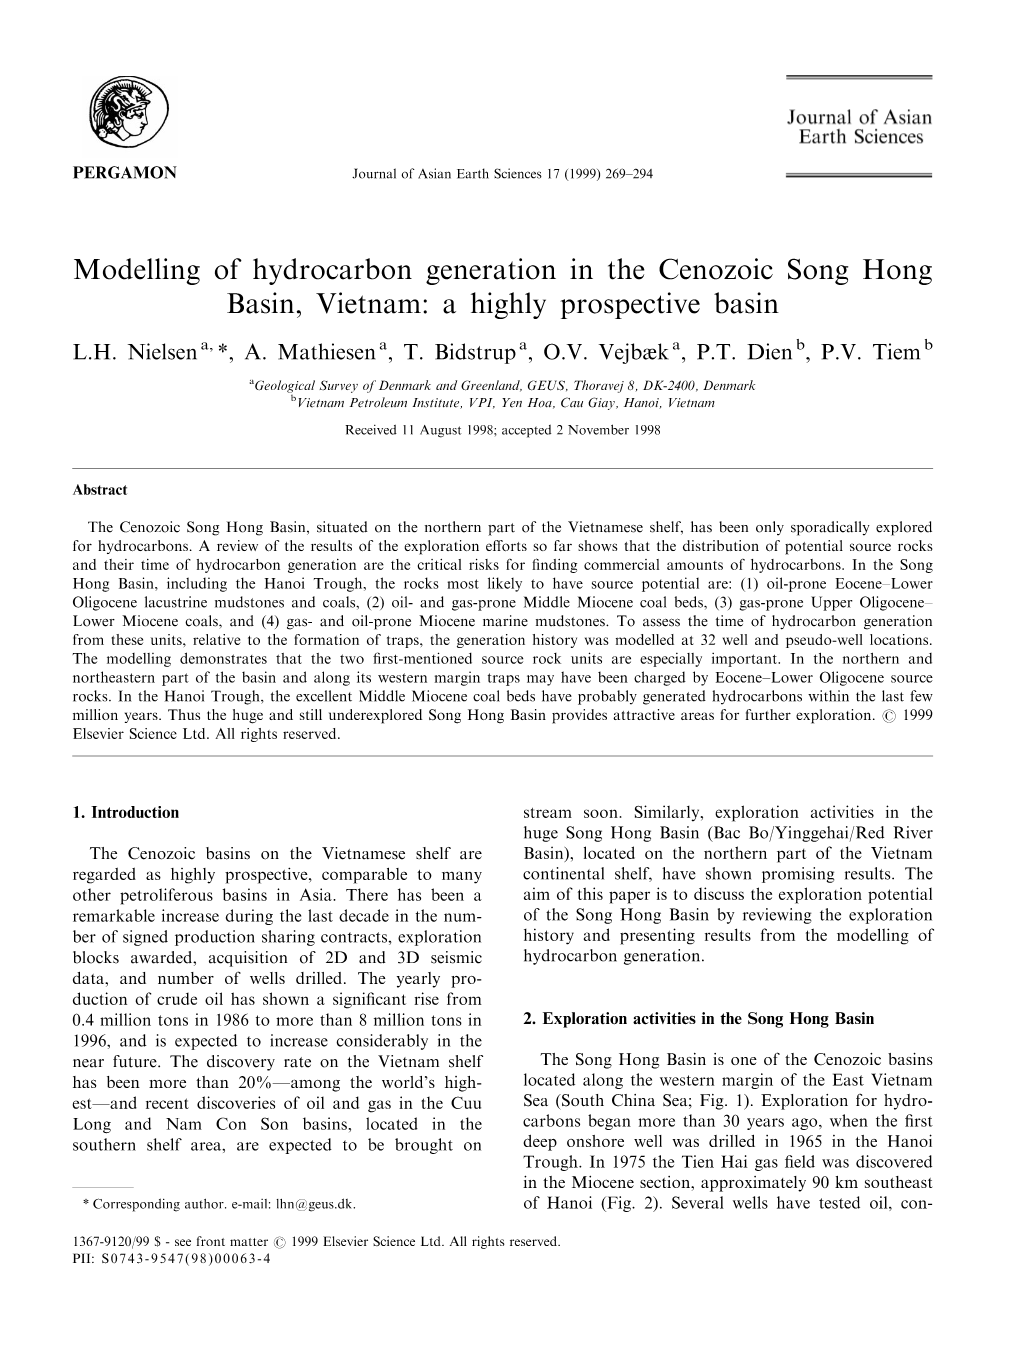 Modelling of Hydrocarbon Generation in the Cenozoic Song Hong Basin, Vietnam: a Highly Prospective Basin